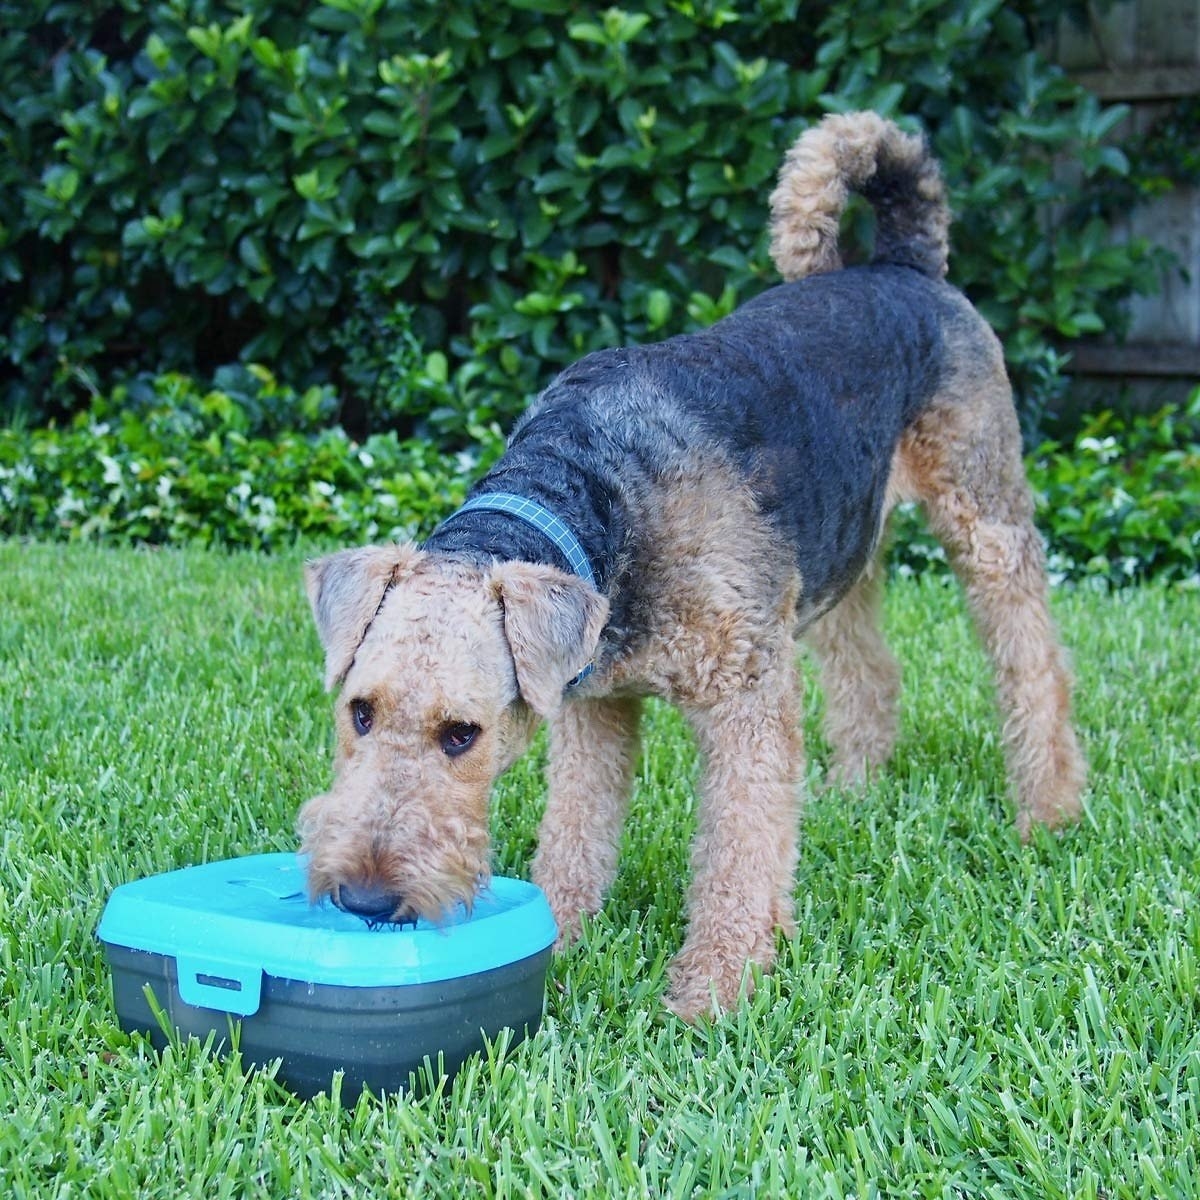 A medium-sized dog drinking out of the rectangular fountain, which has a small spout that pours into a bowl